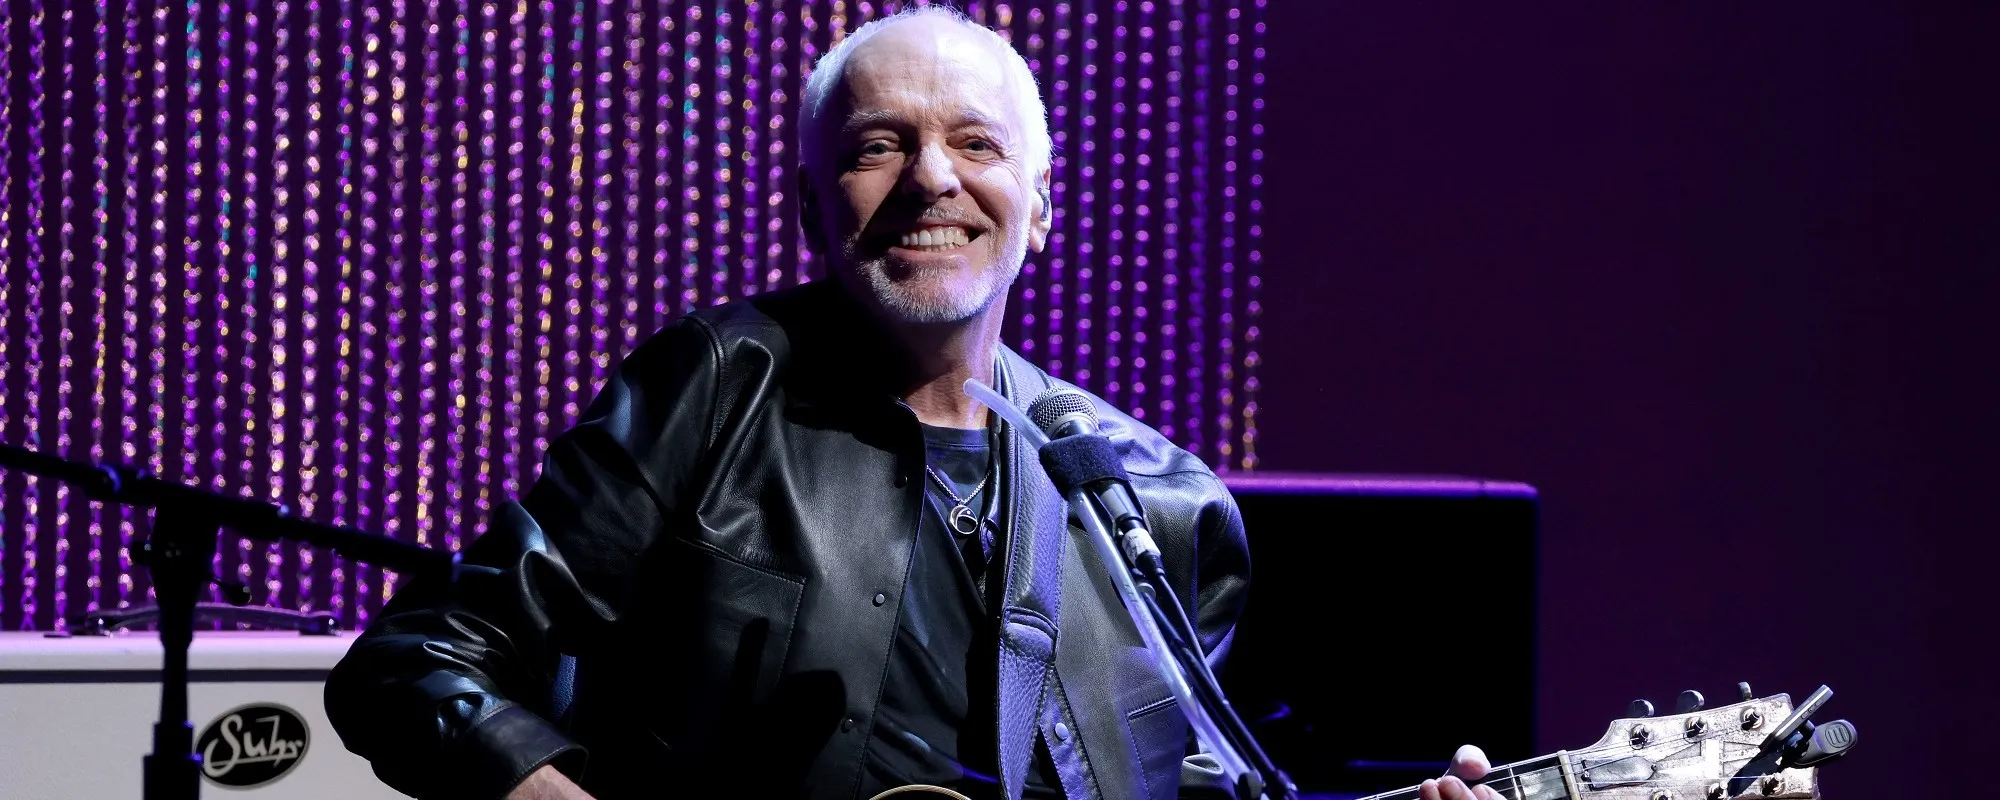 5 Cool Songs Featuring Peter Frampton on Guitar, in Honor of His Birthday and Rock Hall Induction